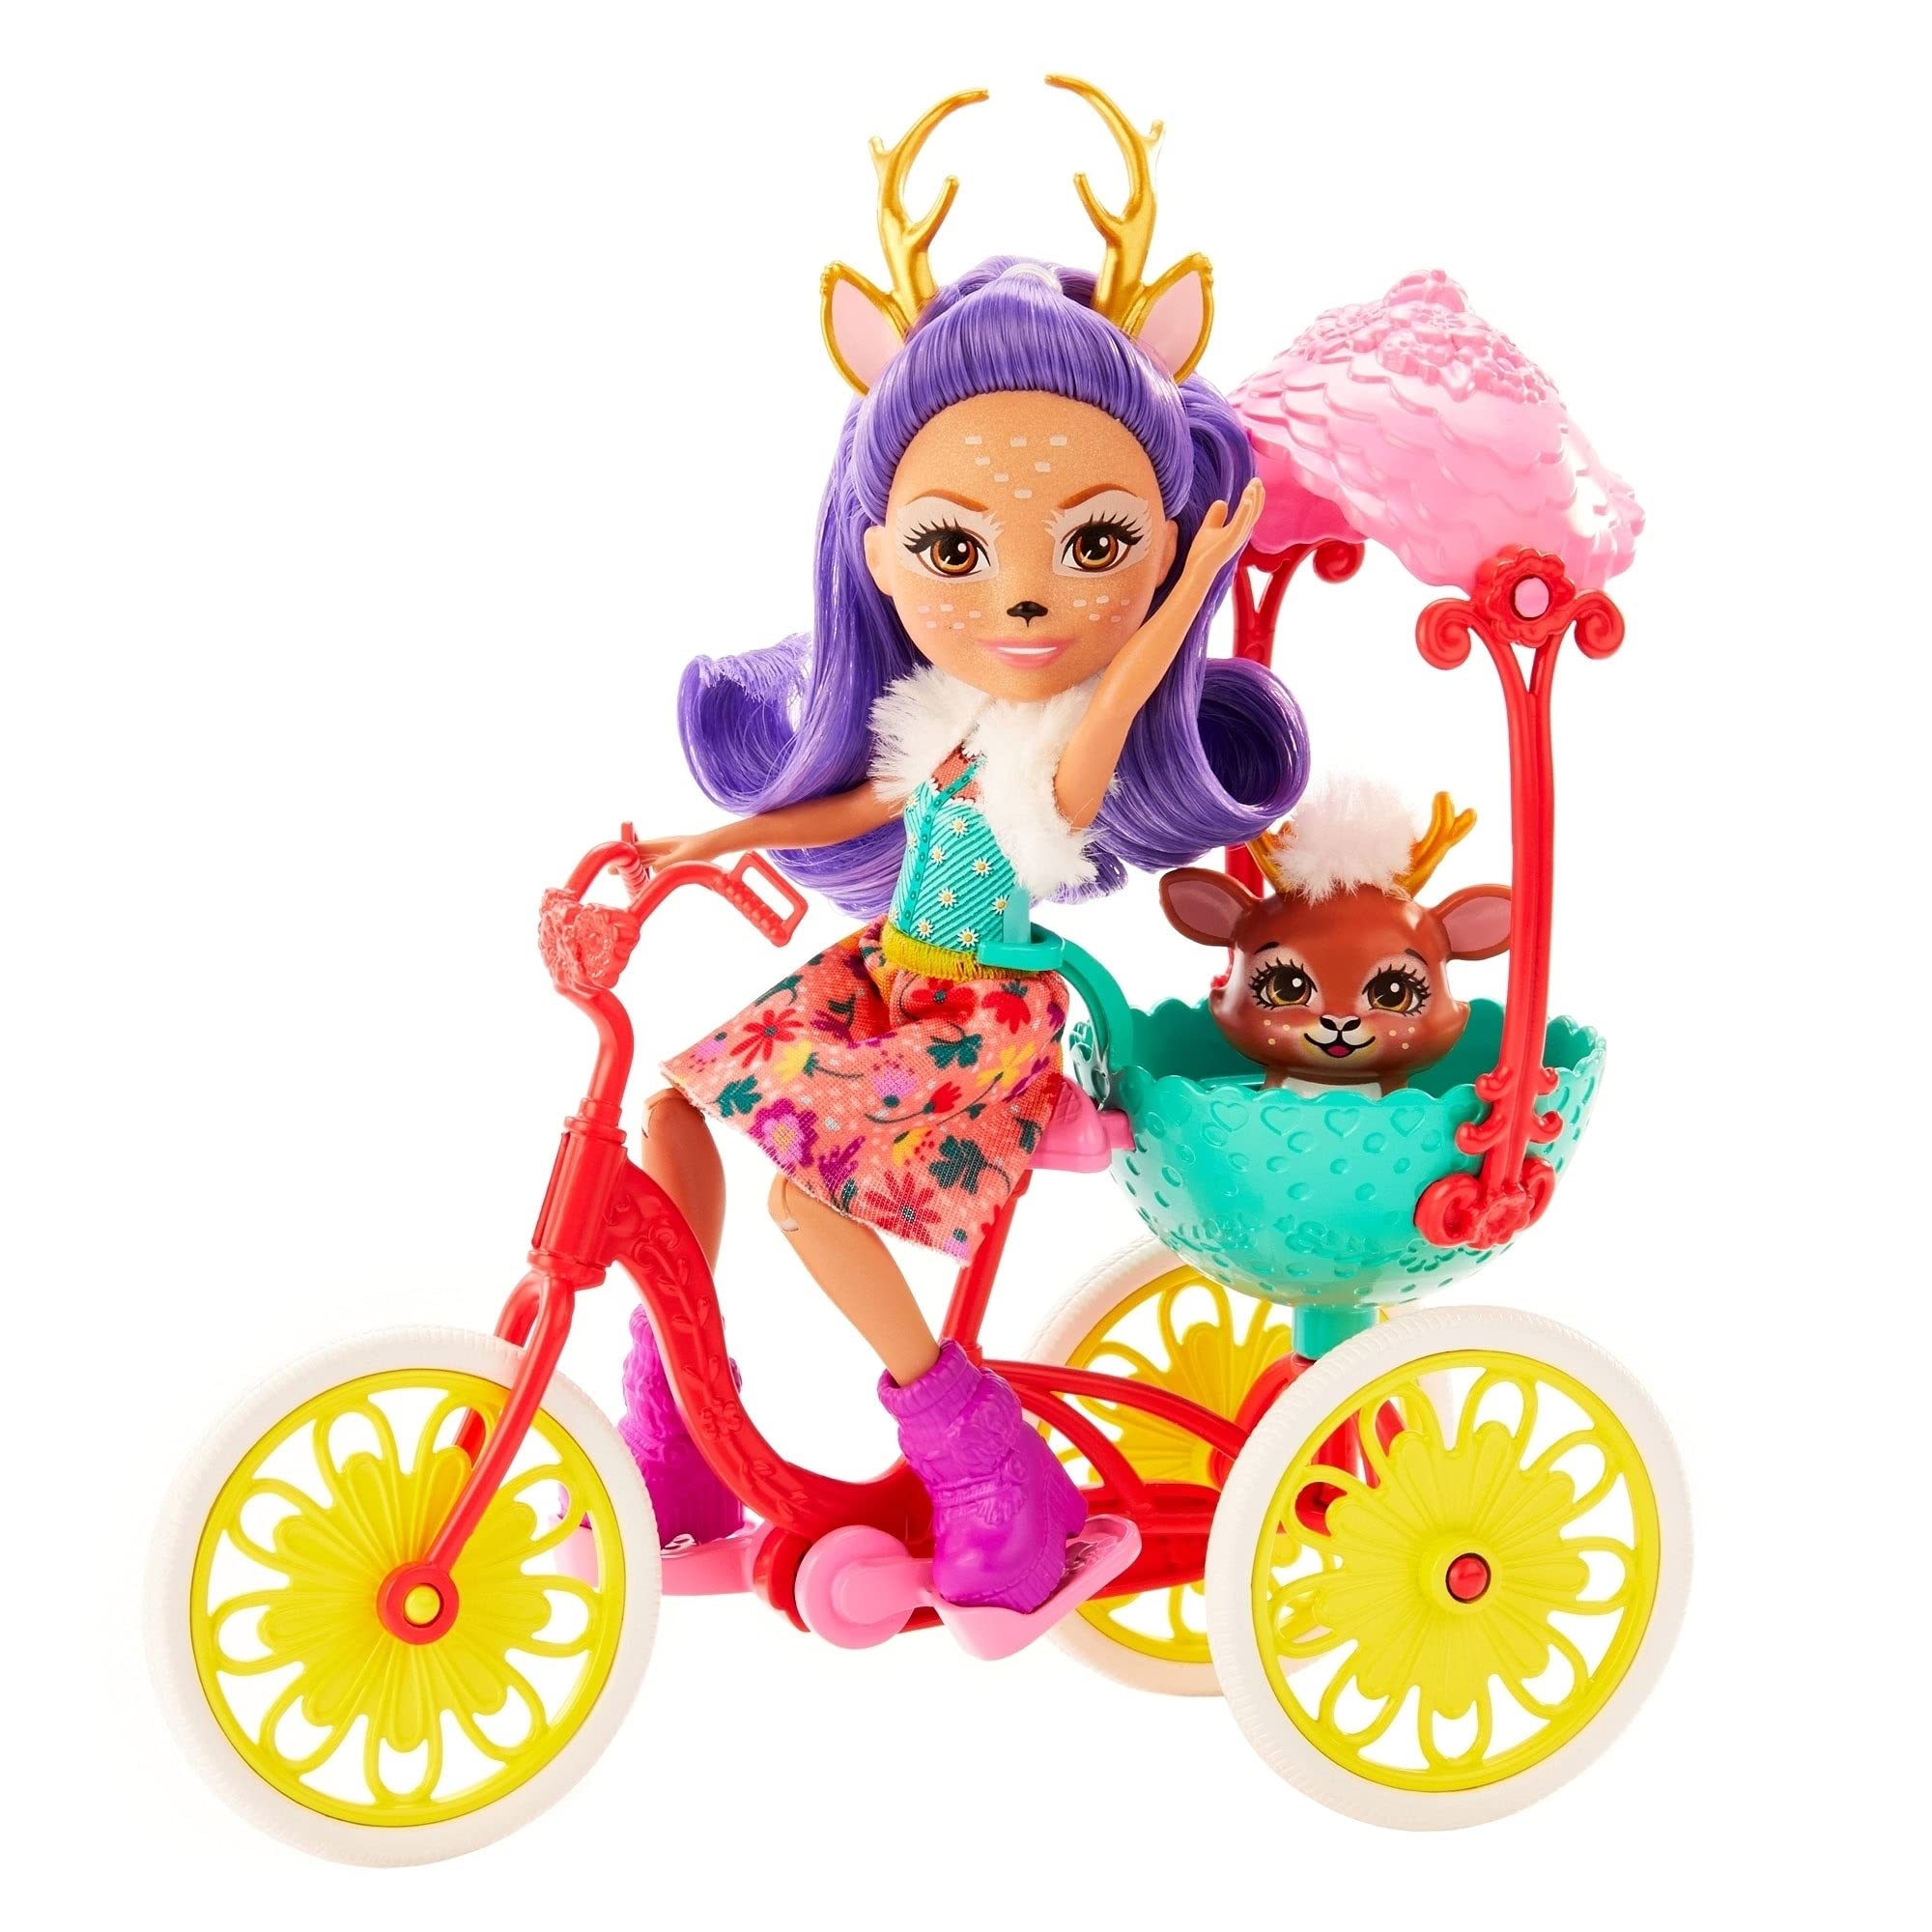 Mattel Enchantimals Bike Buddies Bicycle Playset (11-in) with Danessa Deer Doll (6-in) and Sprint Animal Figure, Doll with Articulated Legs, Great Gift for 3 8 Year Olds